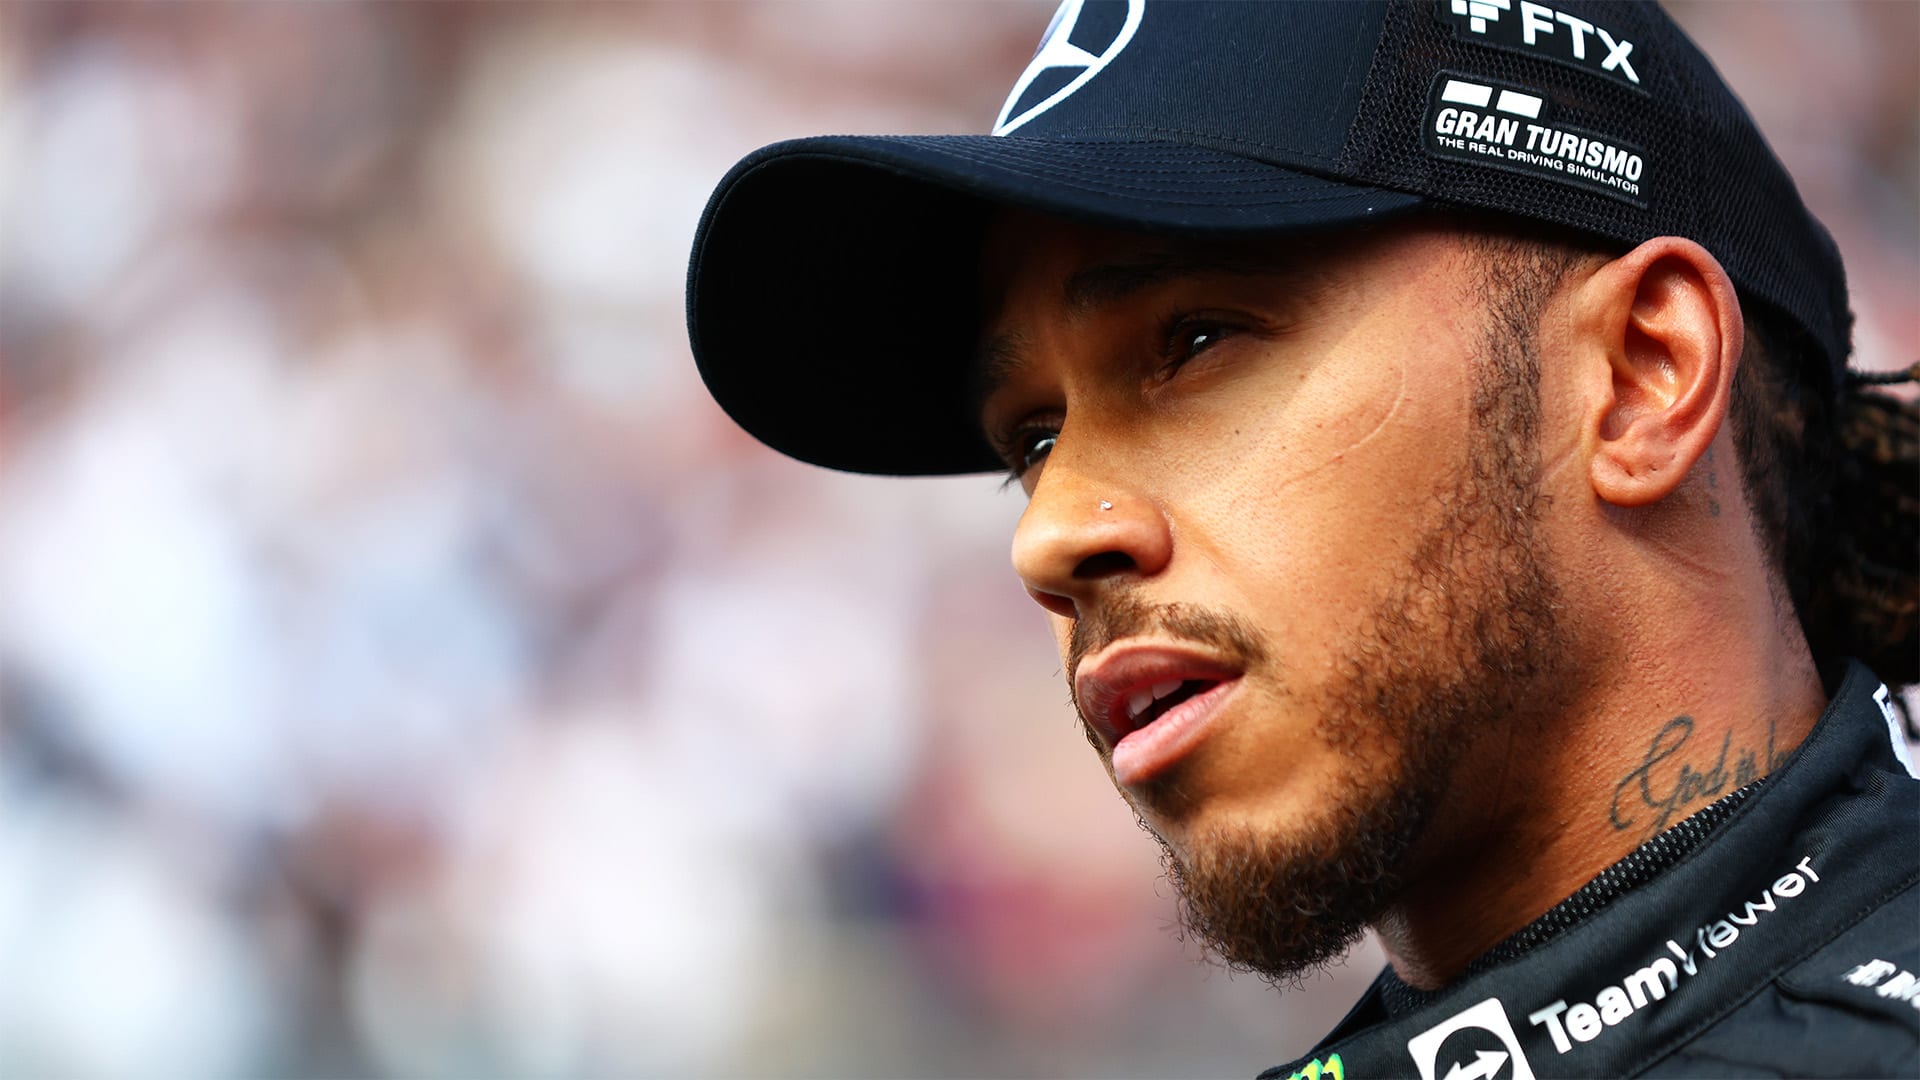 'There's no limit to what we can do' – Hamilton on fighting back, 'best friend' Wolff, and changing the world | Formula 1® - For